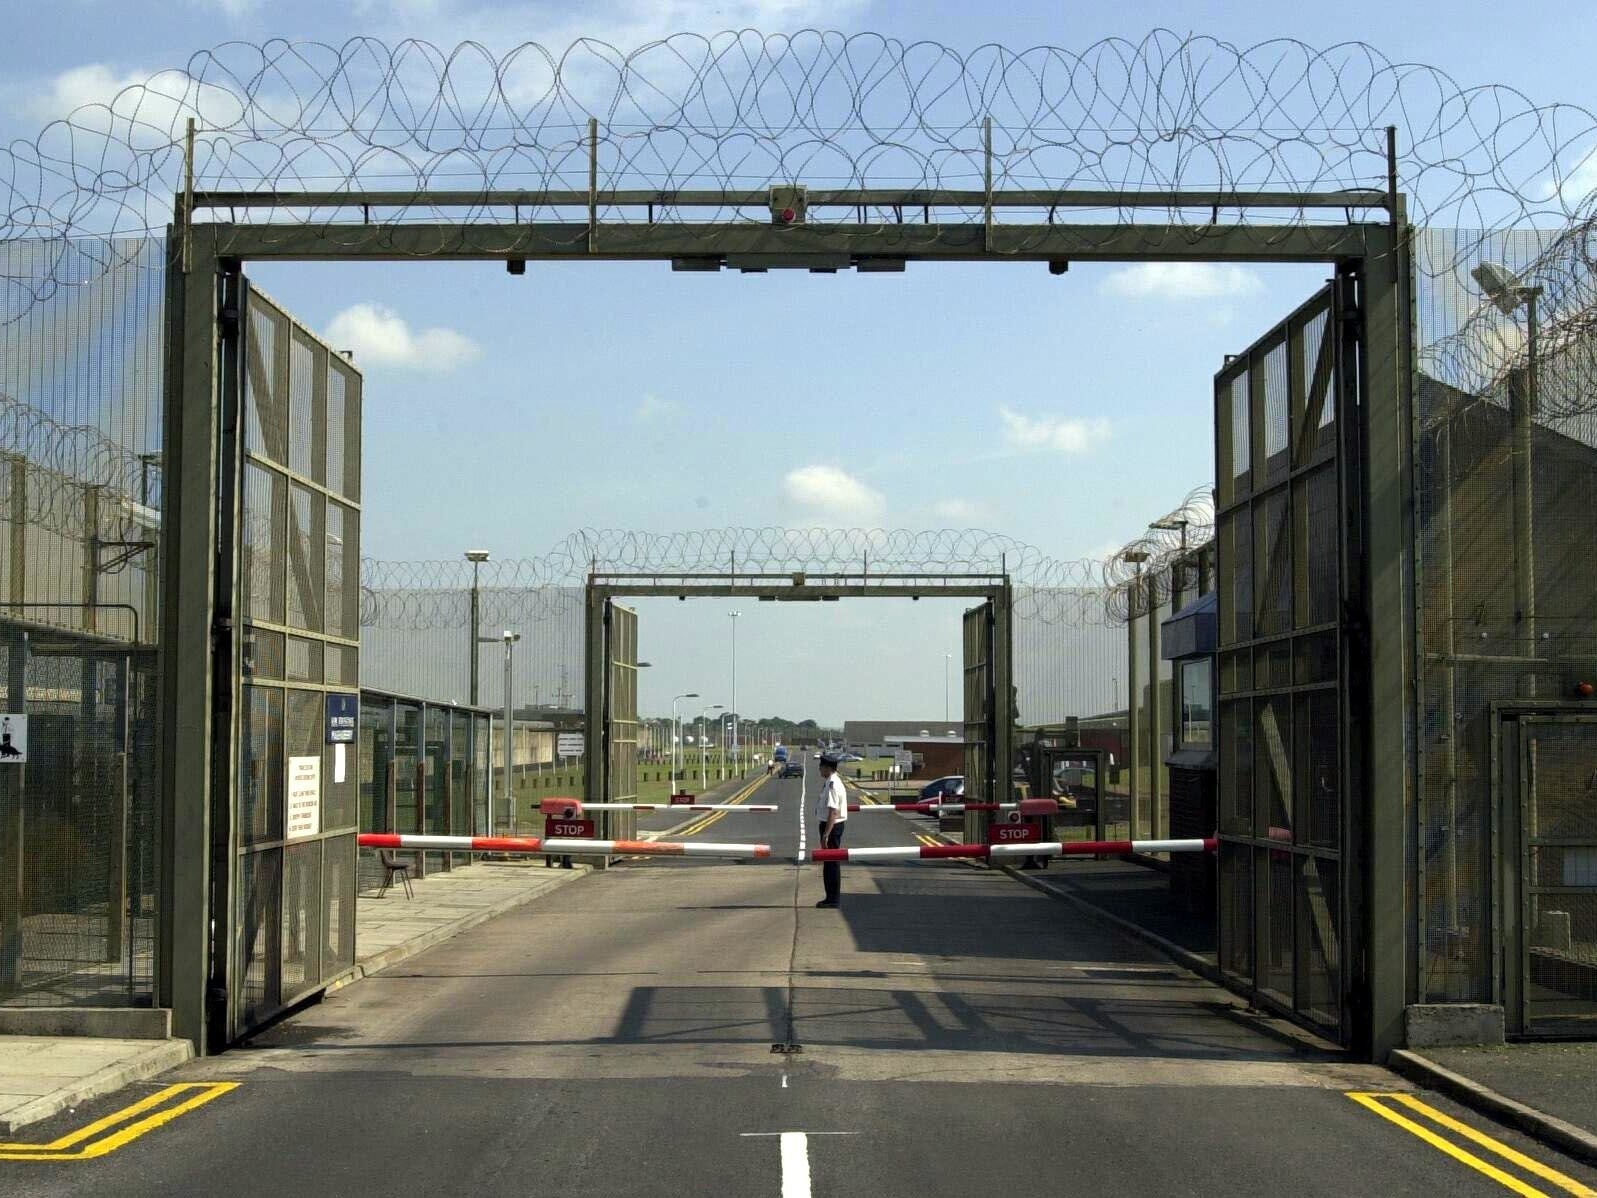 The front gates at the entrance of Maghaberry Prison in Northern Ireland